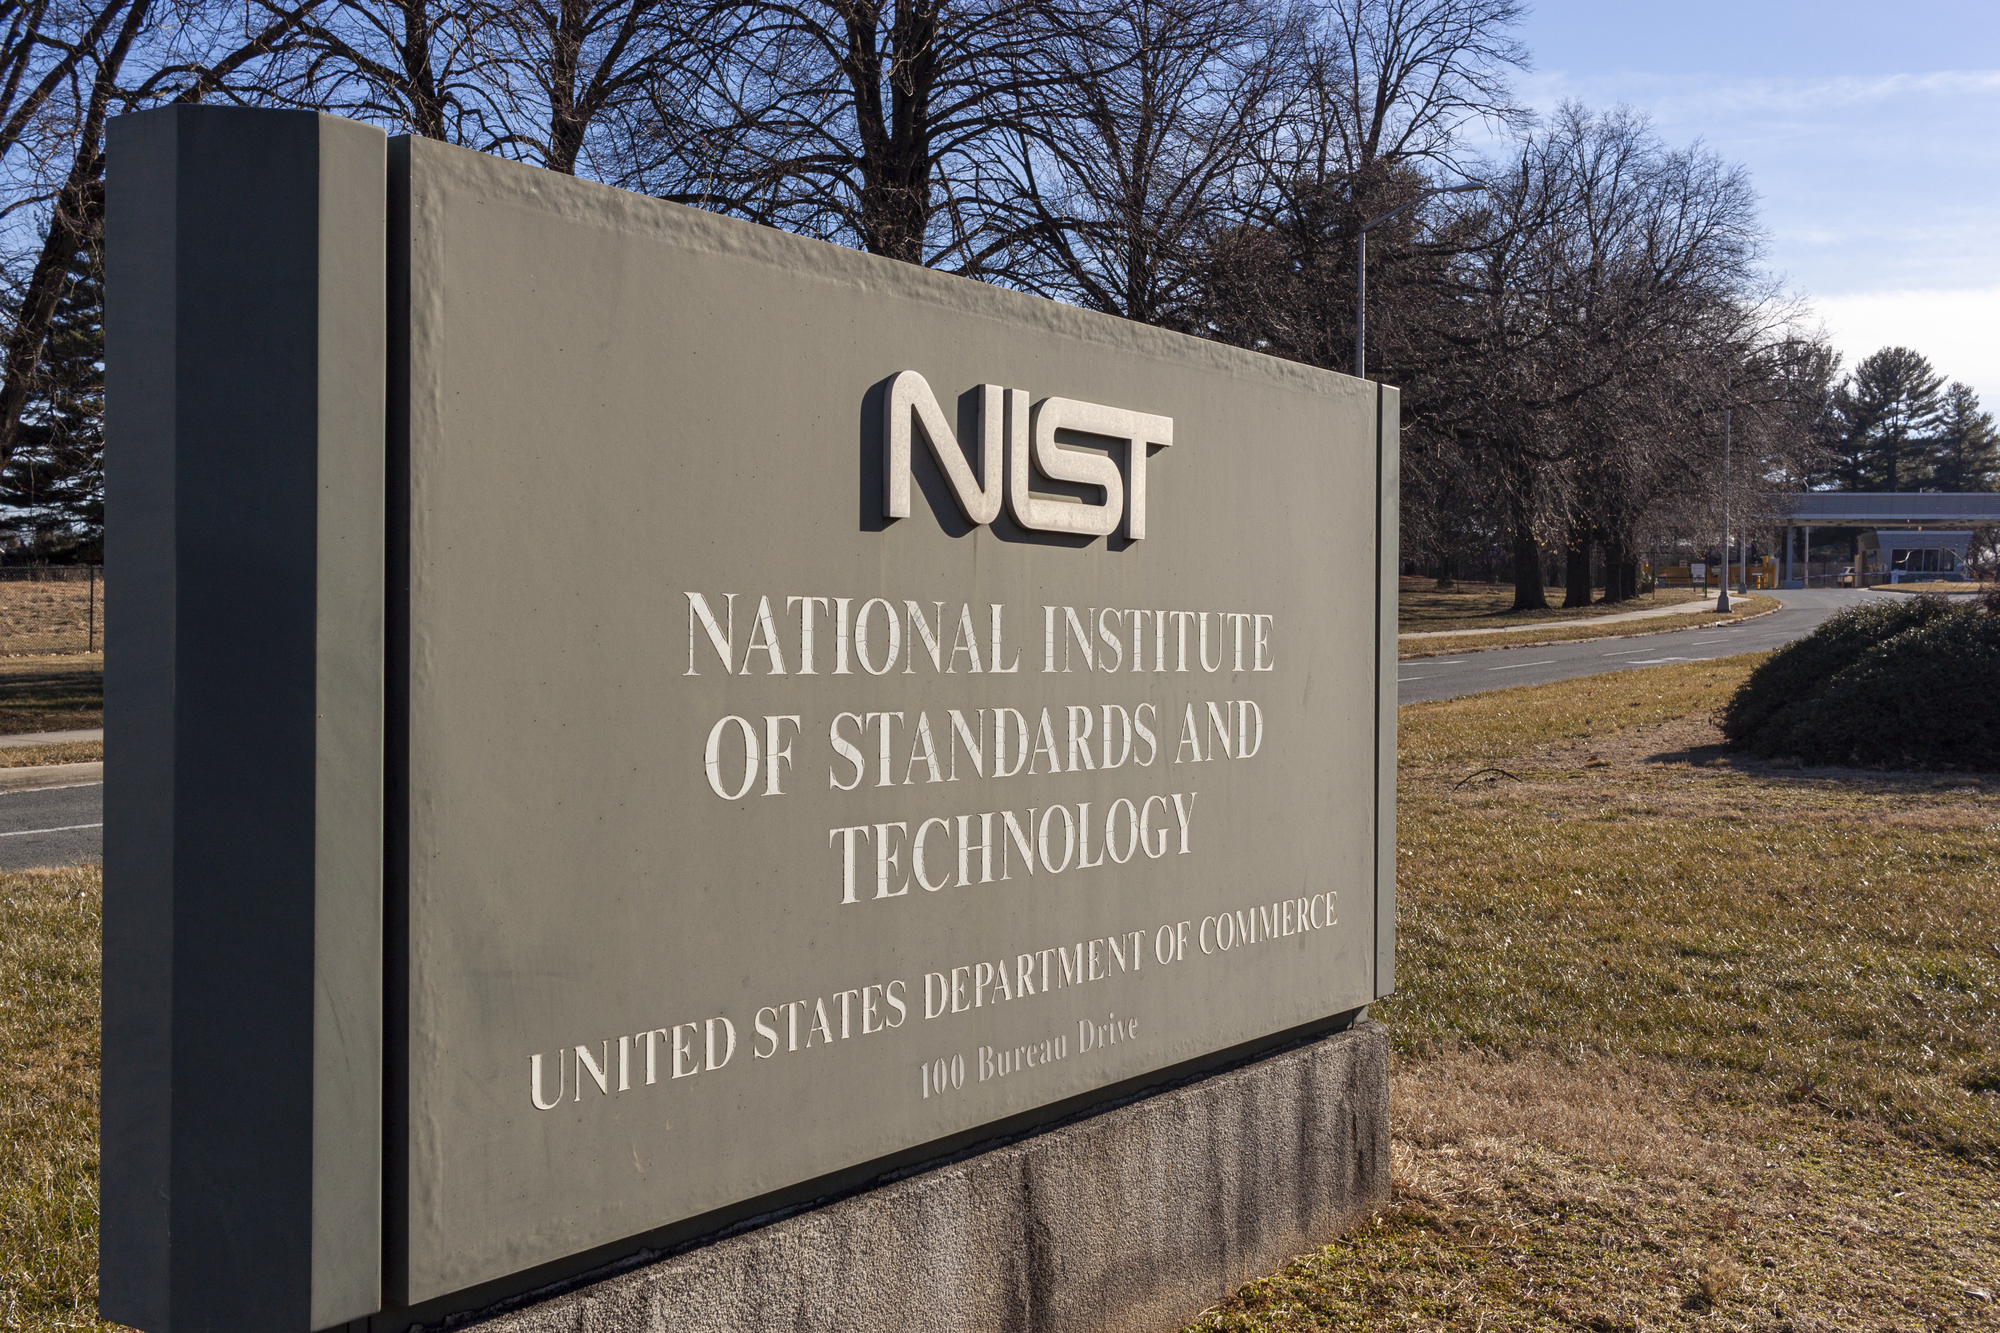 A sign indicating compliance with NIST 800-171 guidelines at the national institute of standards and technology.